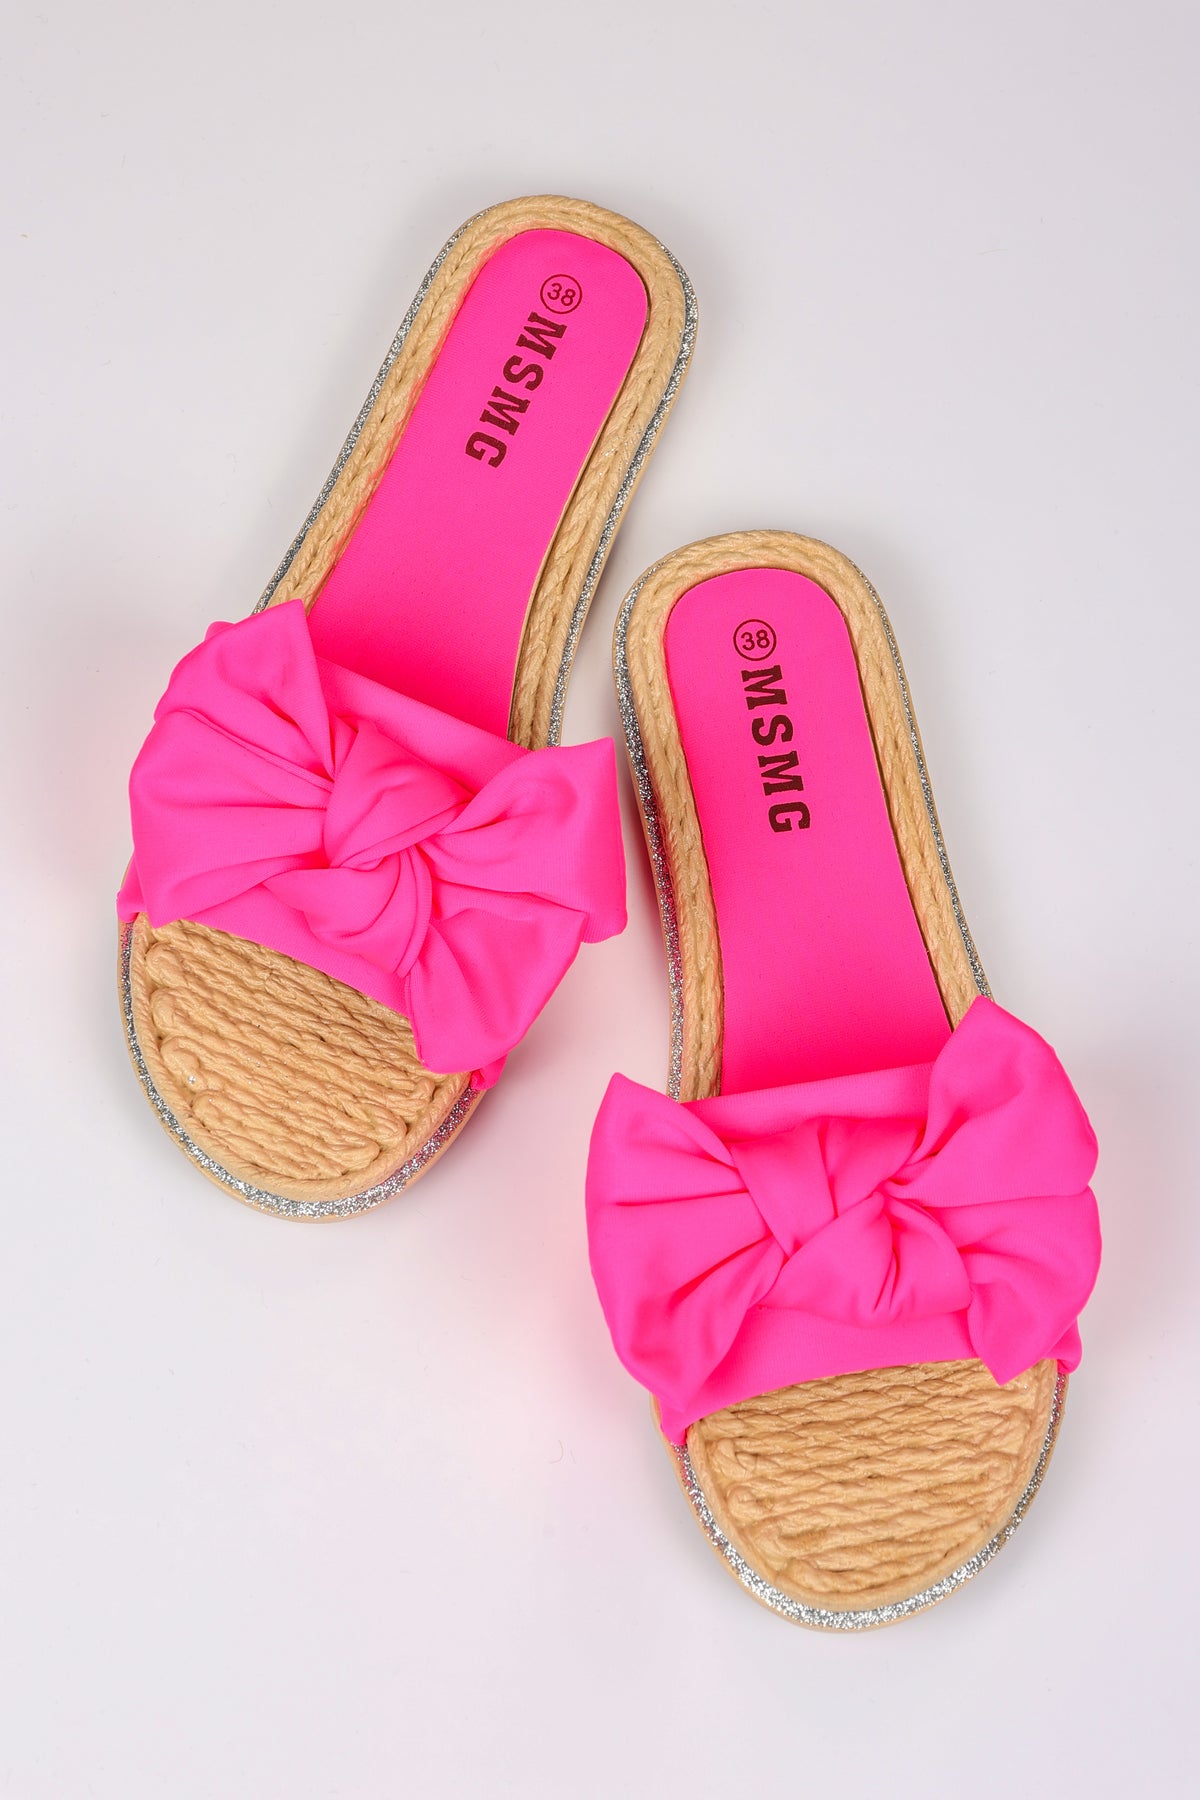 Cute Silky Material Sliders Bow Pink